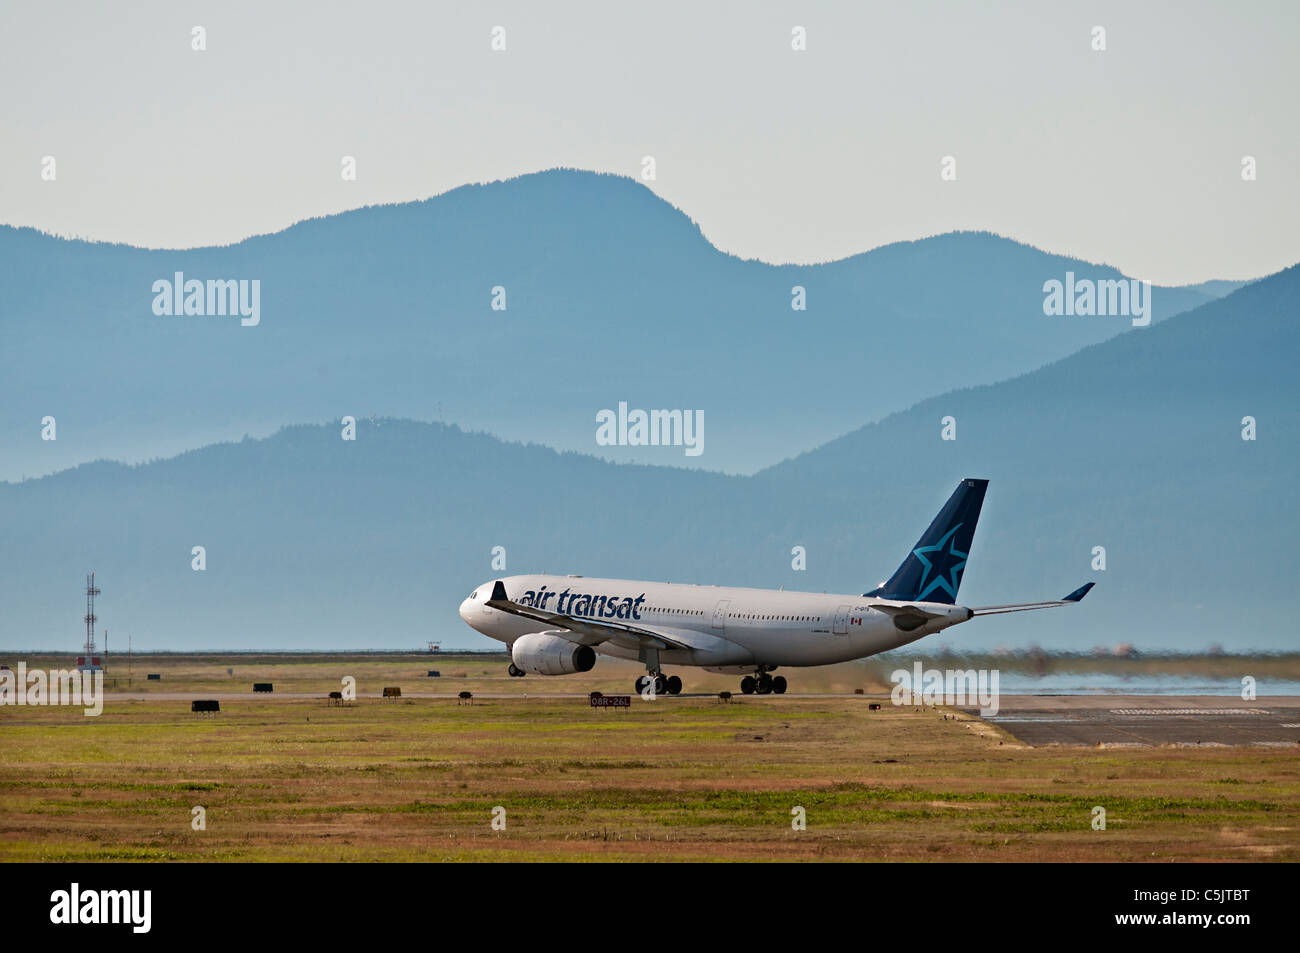 An Air Transat Airbus A330-200 jetliner takes off from Vancouver International Airport. Stock Photo